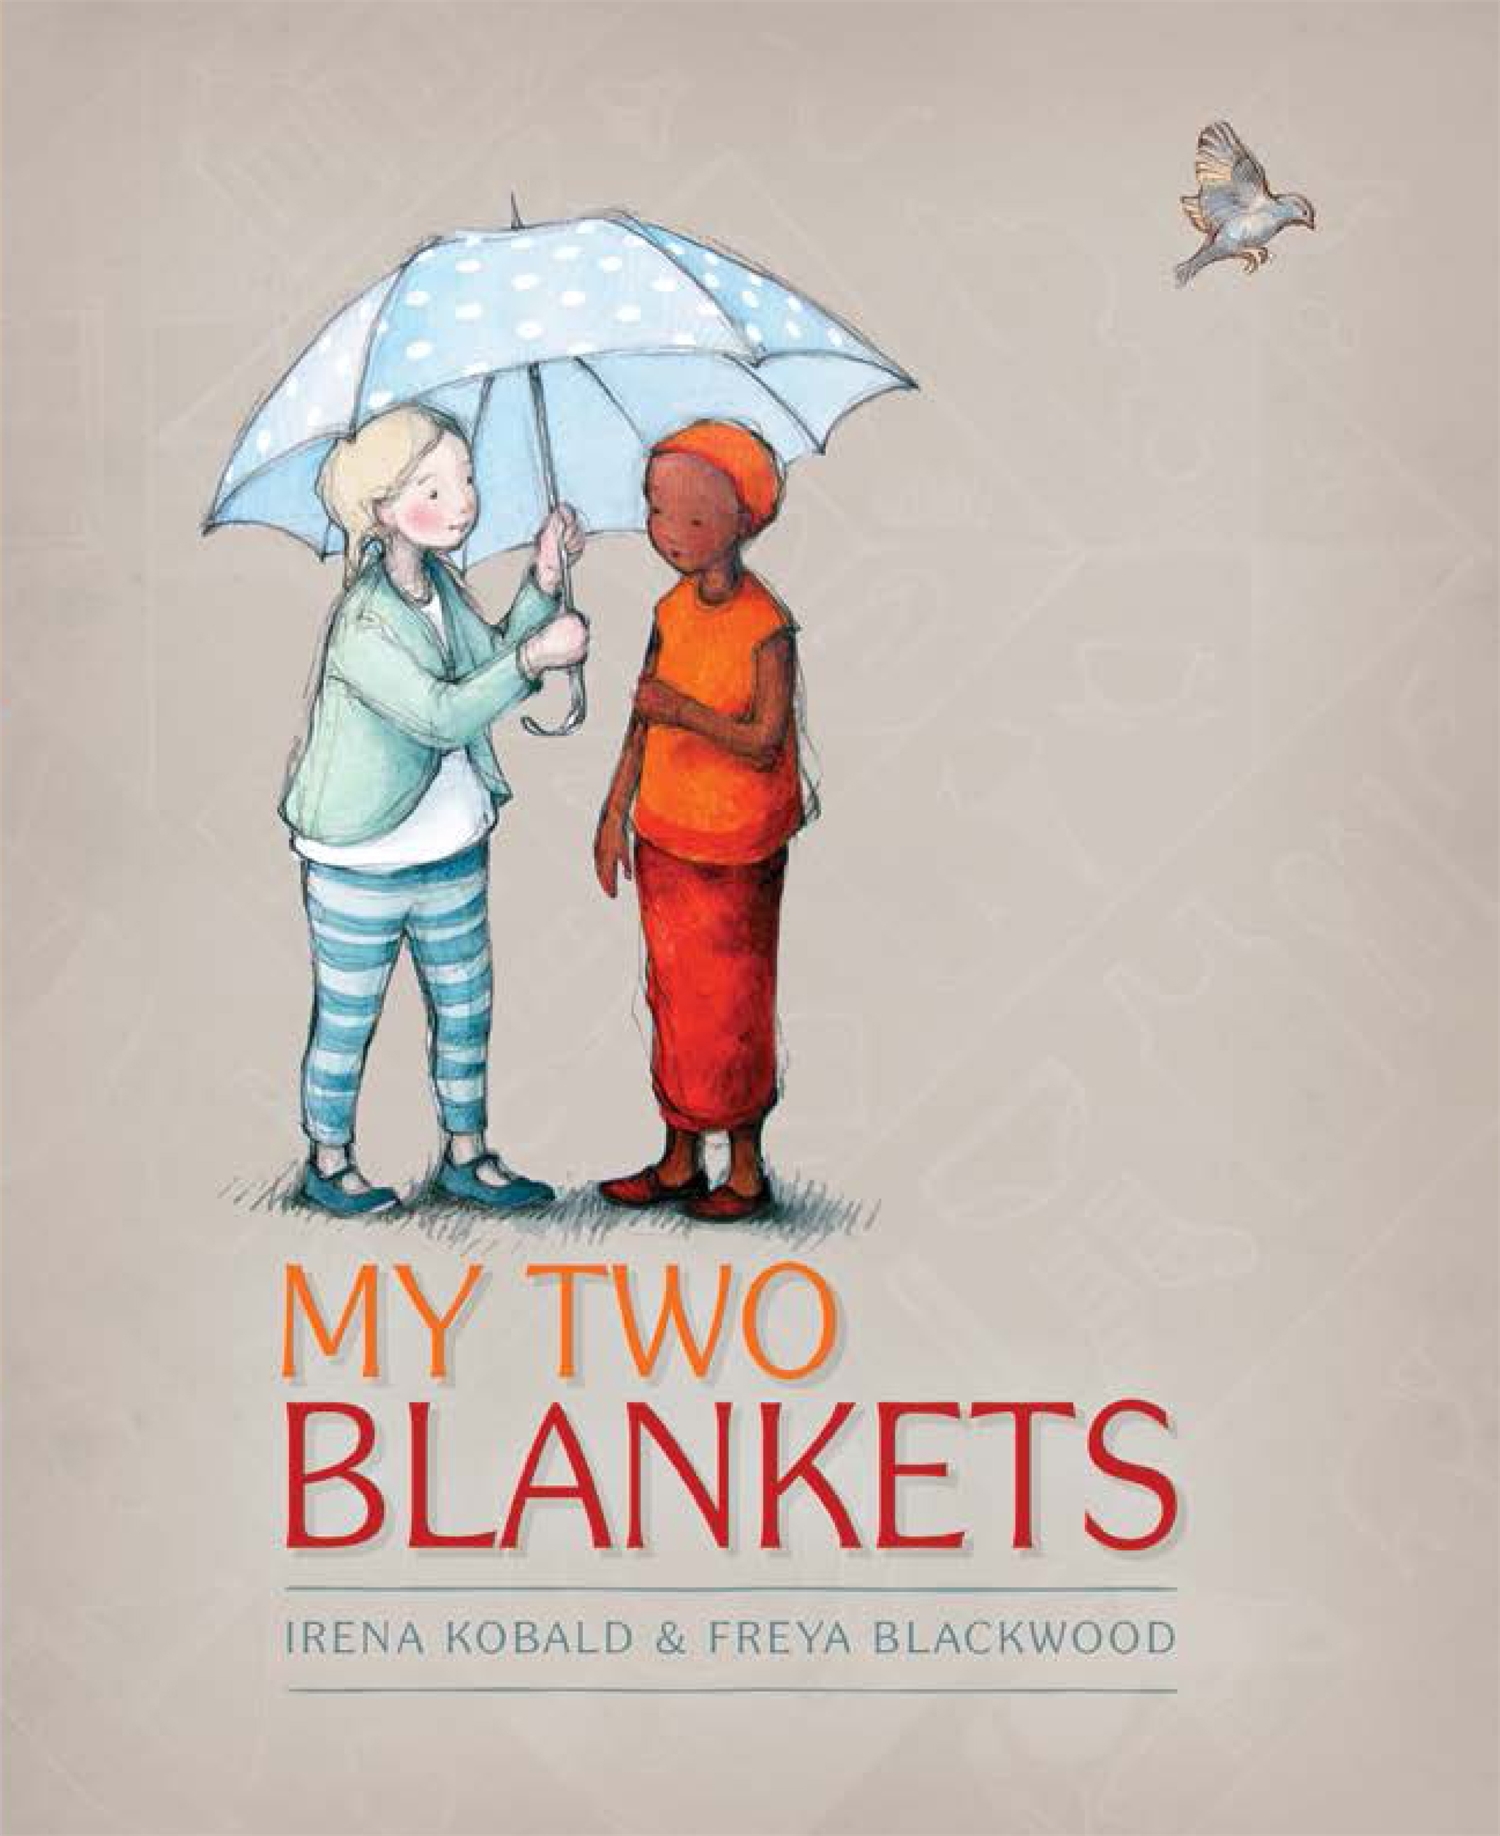 One person holding an umbrella over another on the cover of My Two Blankets